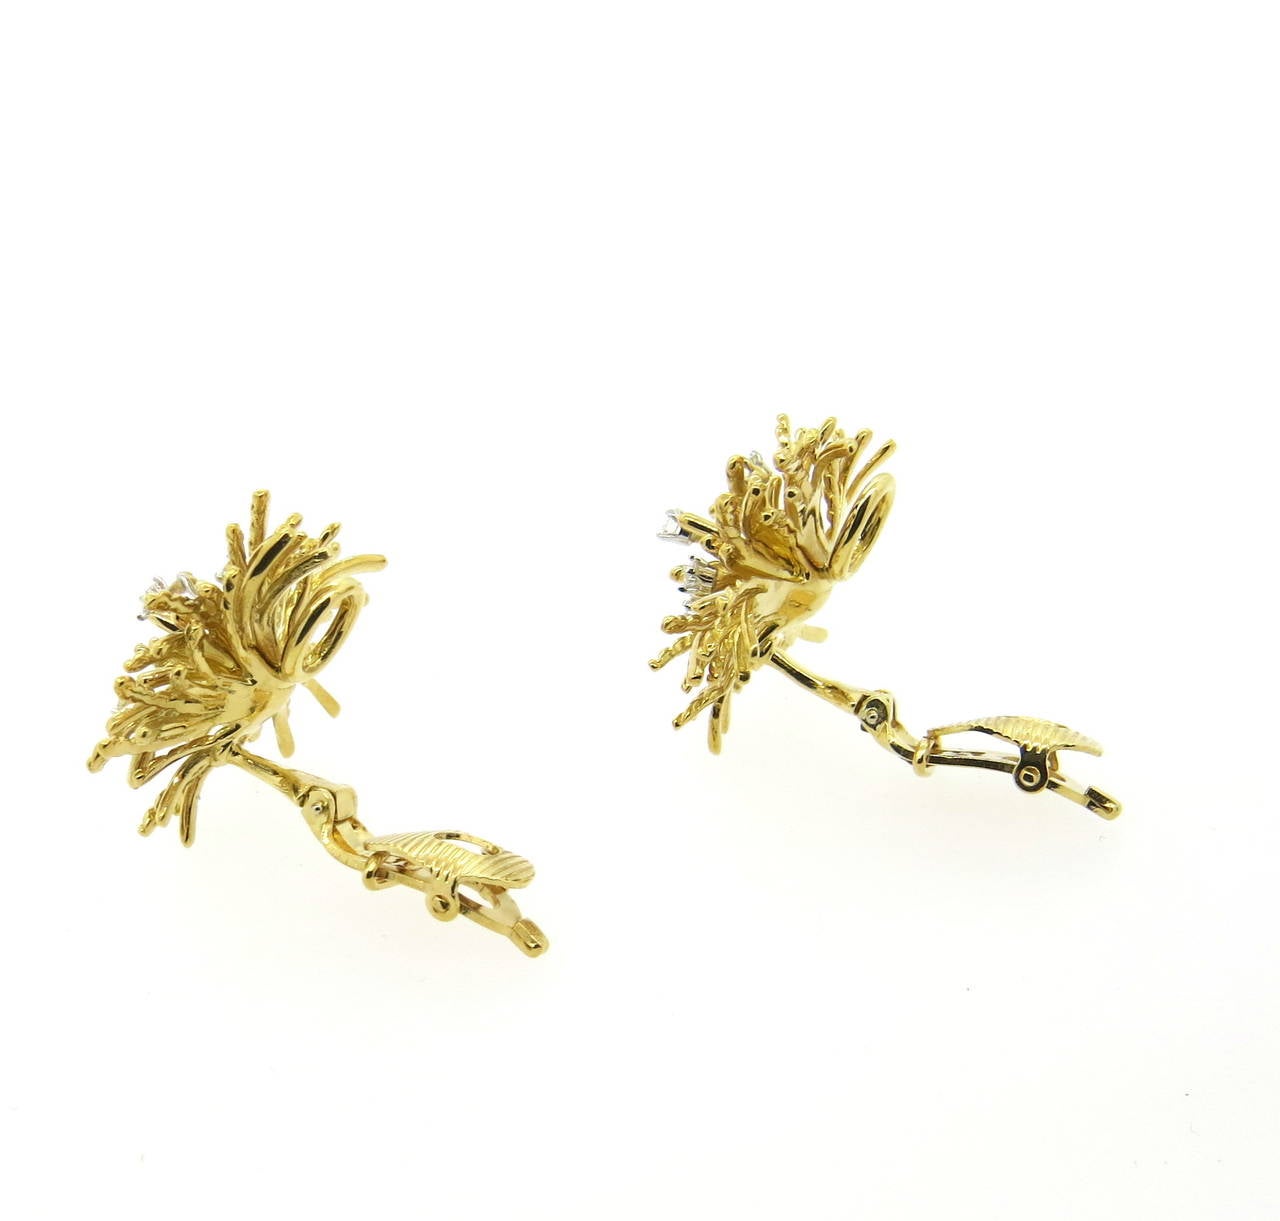 A pair of 18k yellow gold earrings depicting anemone, set with approximately 0.50ctw of G/VS diamonds.  Crafted by Tiffany & Co, the earrings measure 27mm x 26mm and weigh 20.4 grams.